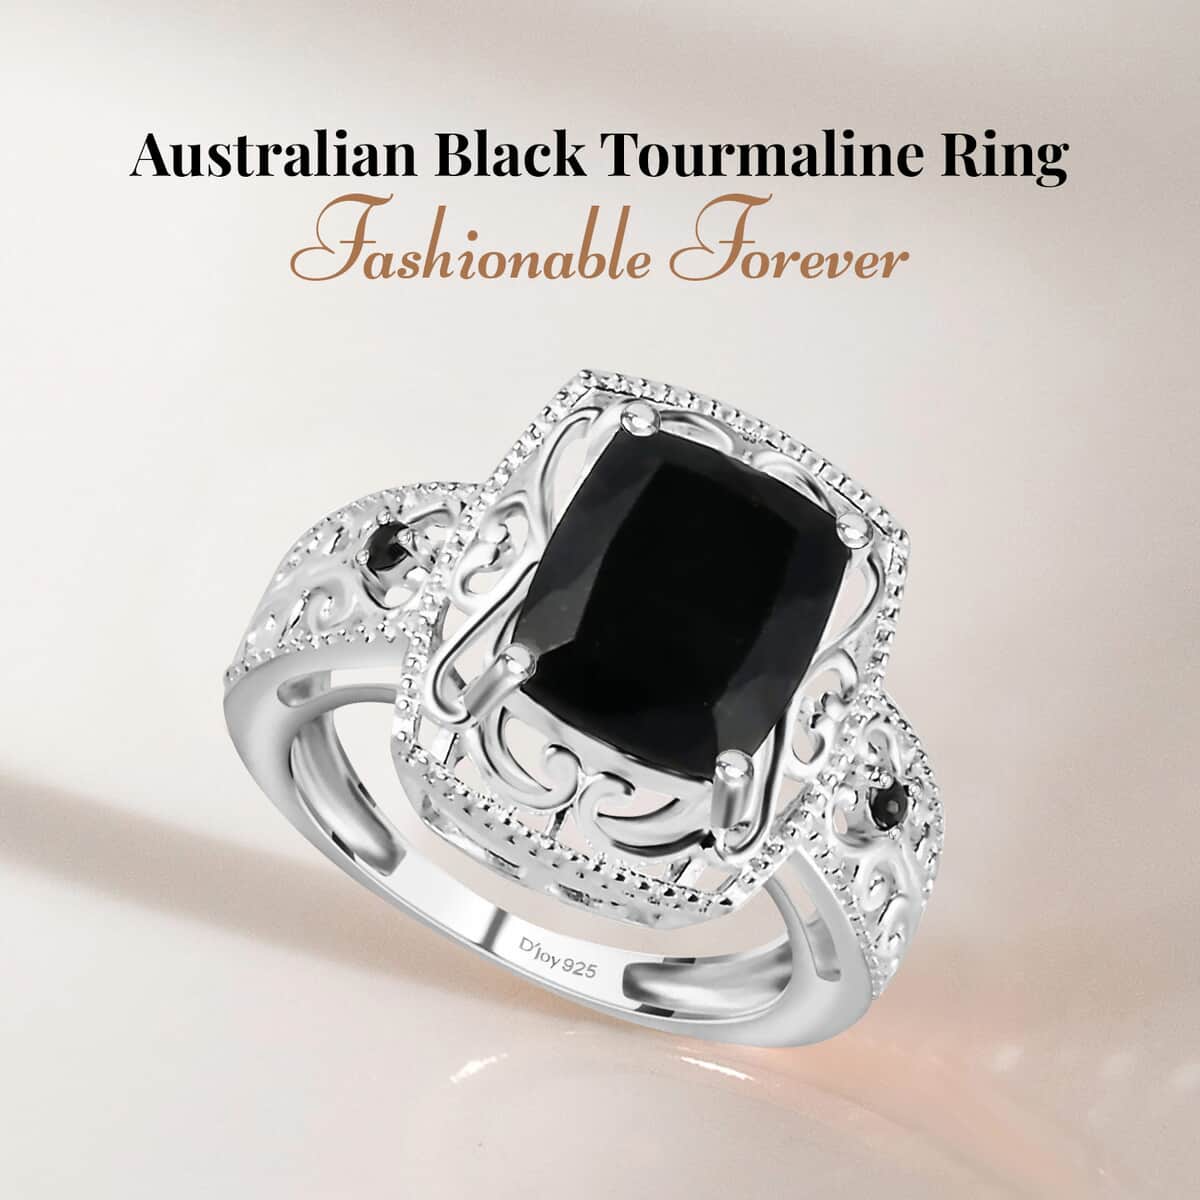 Australian Black Tourmaline and Thai Black Spinel 3.60 ctw Ring, Fashion Ring in Sterling Silver, Black Engagement Rings For Her (Size 8.0) image number 1